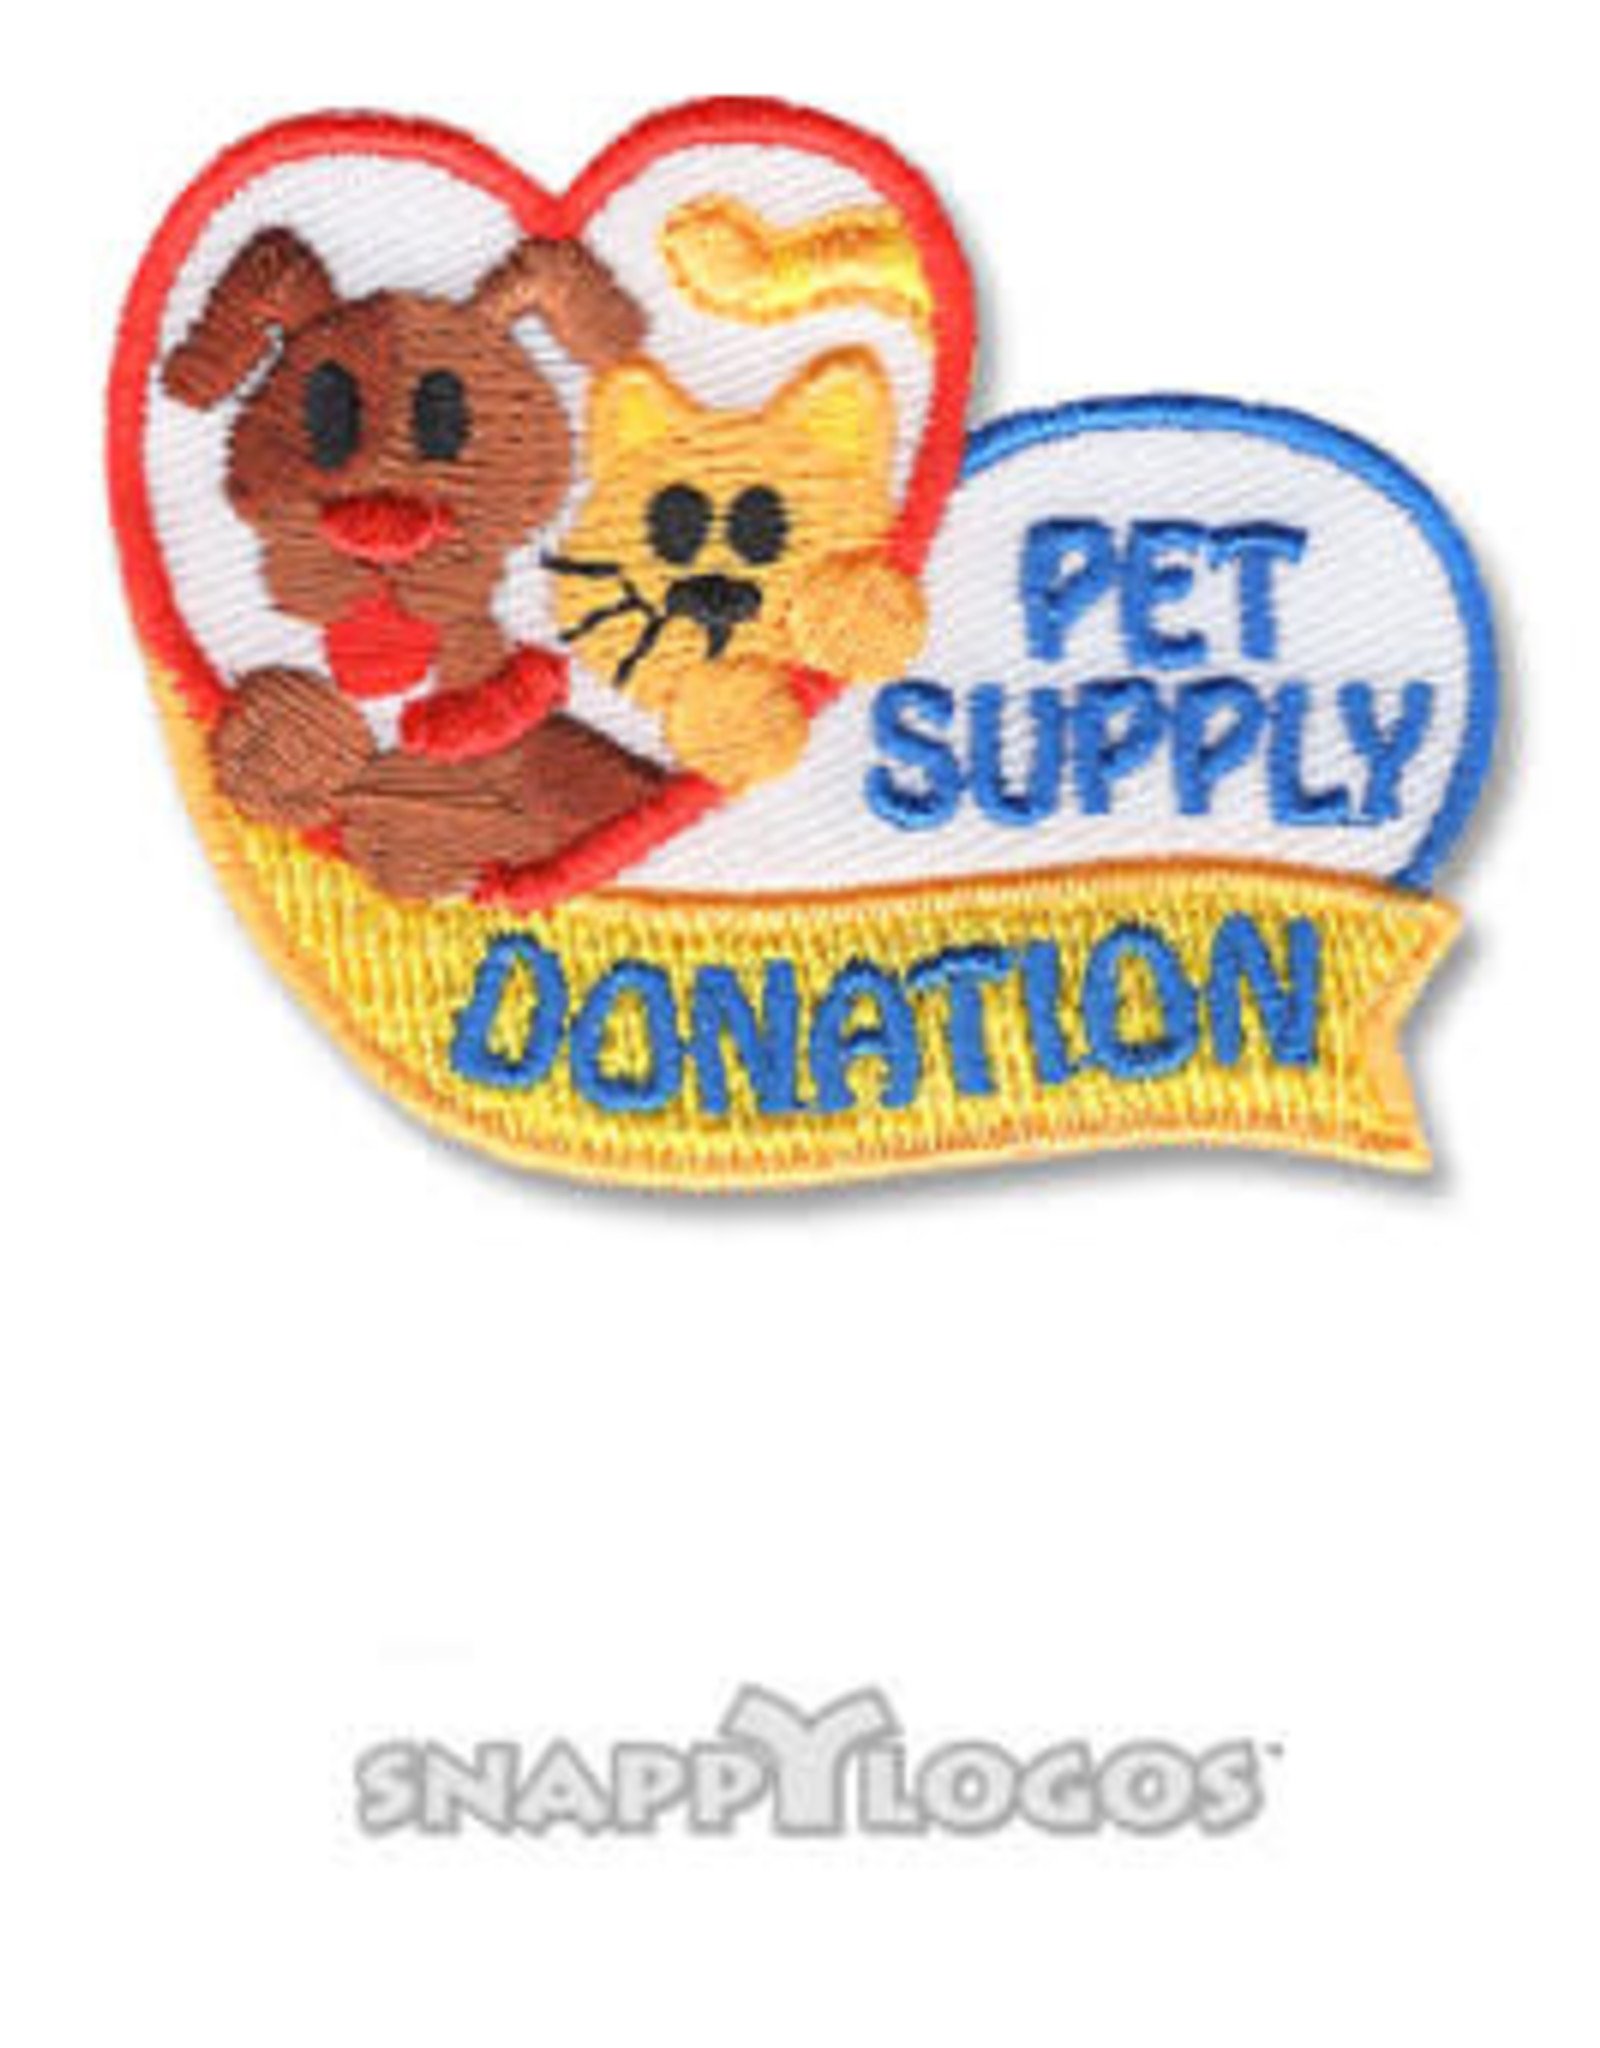 snappylogos Pet Supply Donation w/ Cat & Dog in Heart Fun Patch (7151)